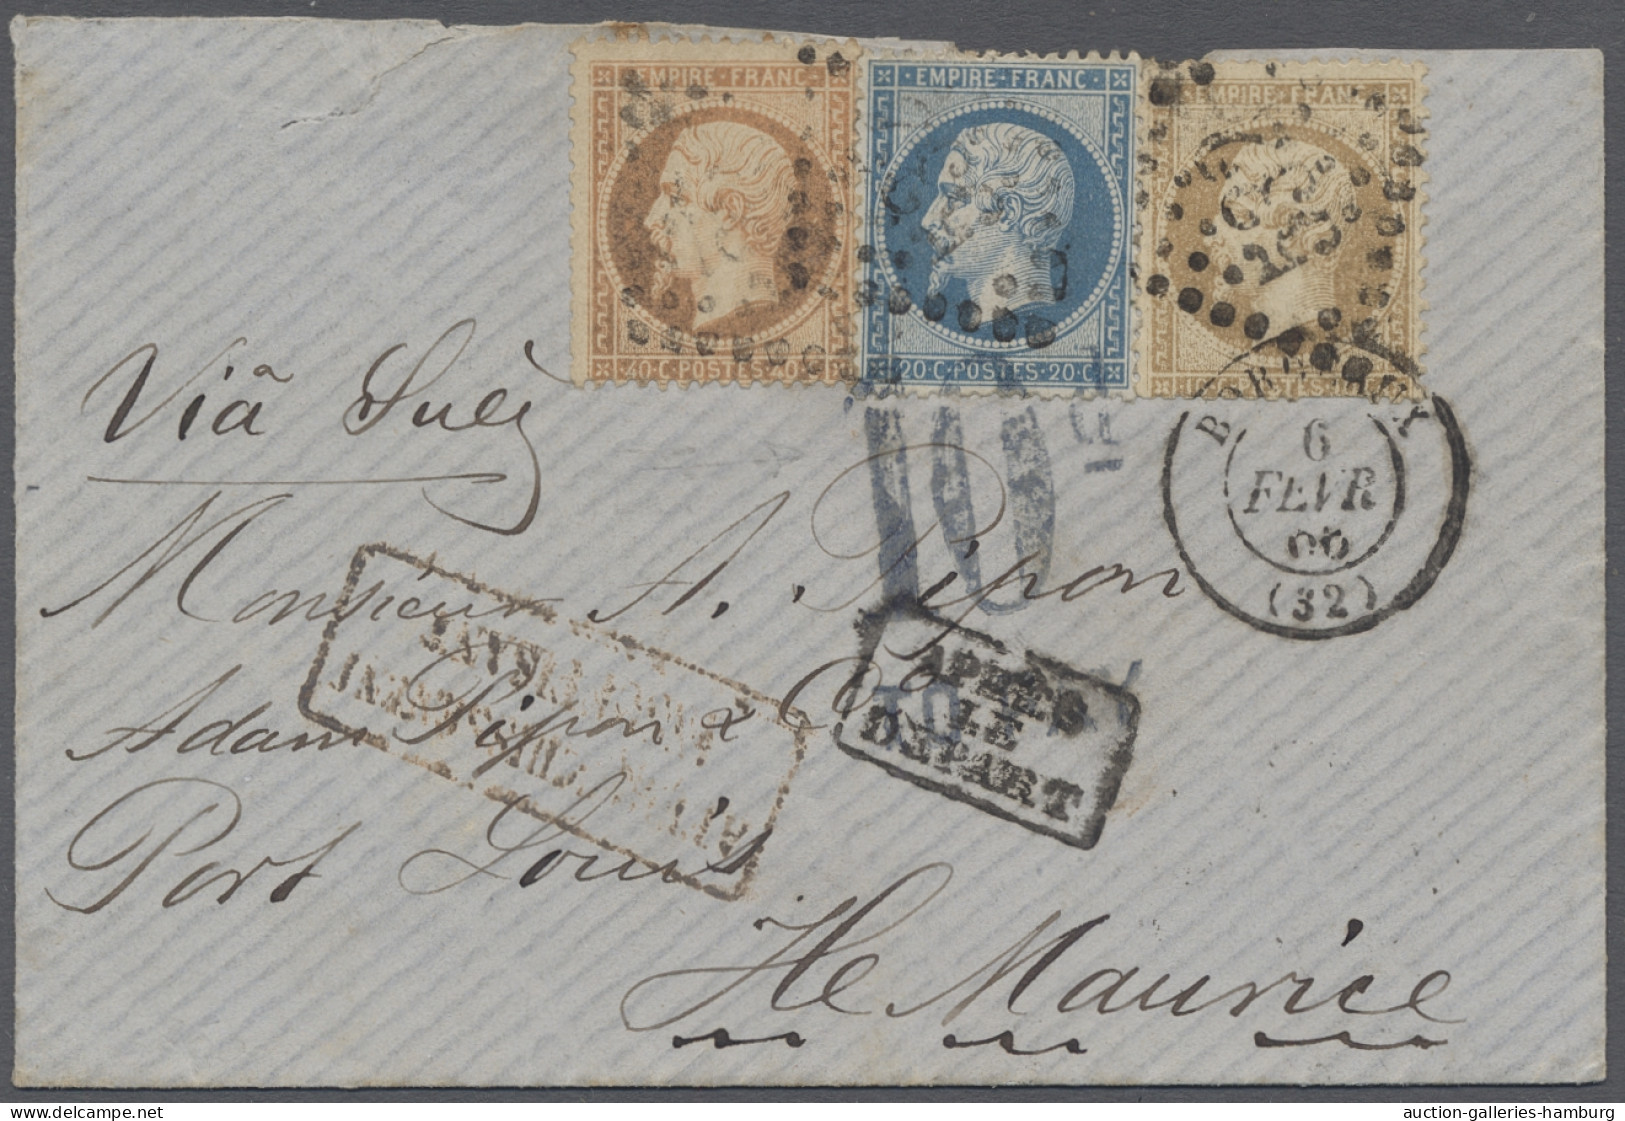 Mauritius: 1866, Feb 6, Letter From Bordeaux To Port Louis Franked France 10c, 2 - Maurice (...-1967)